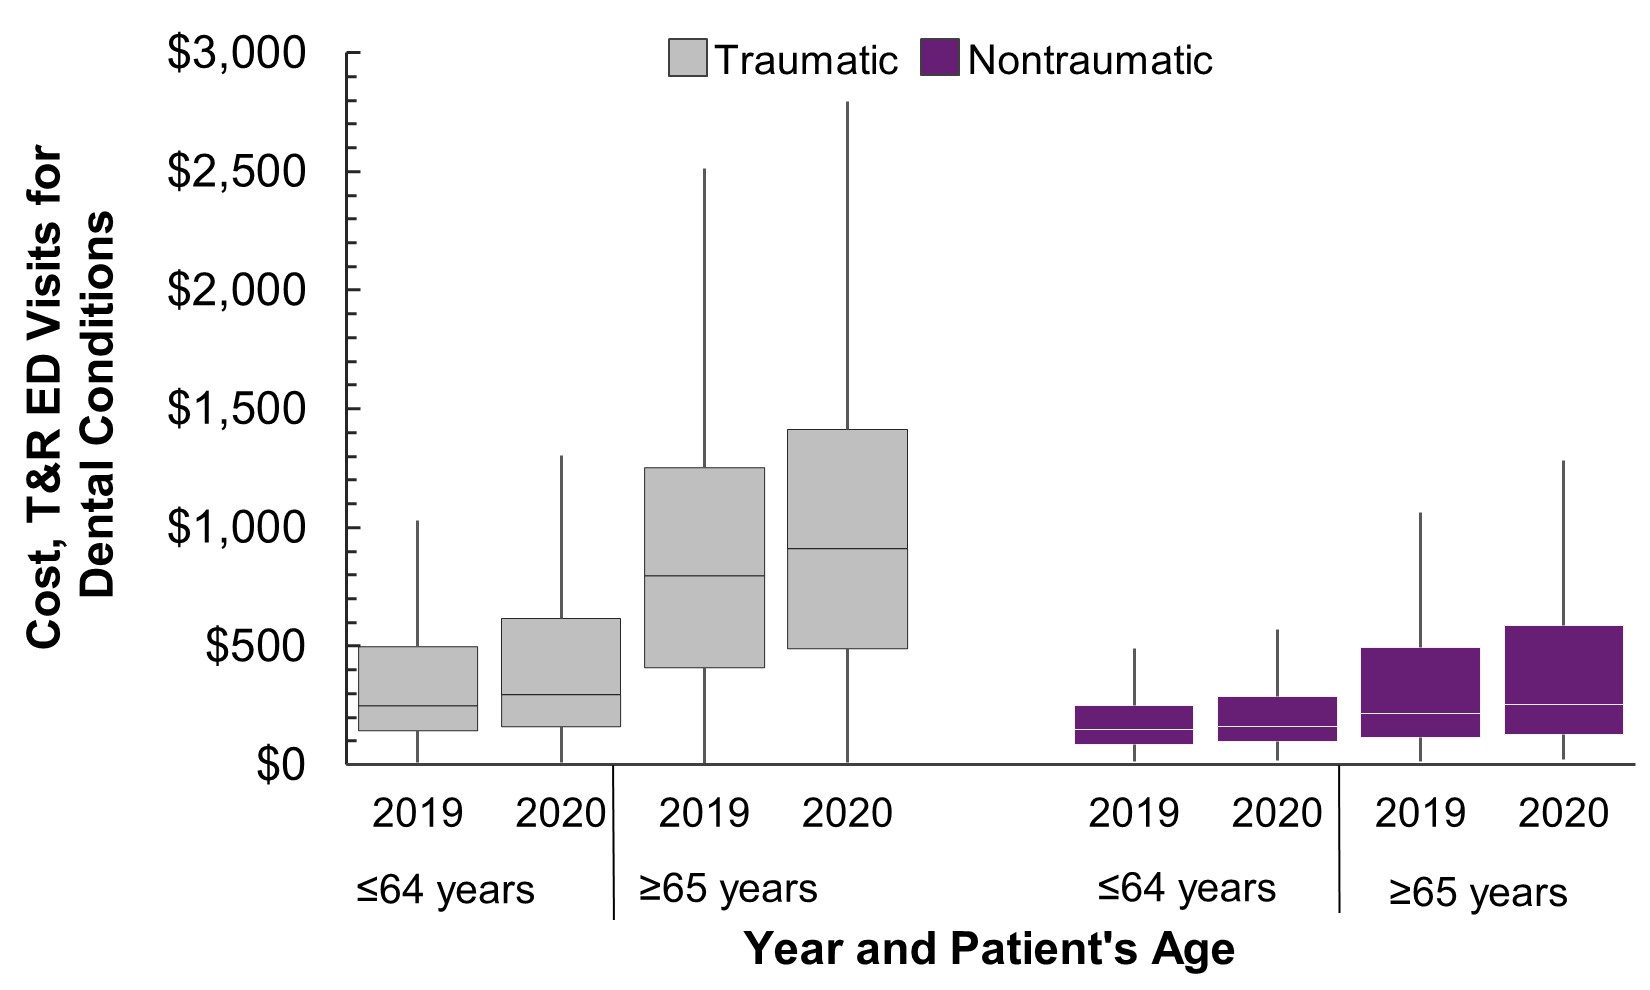 Cost for treat-and-release ED visits for dental conditions by age group and traumatic vs. nontraumatic conditions, 2019 and 2020